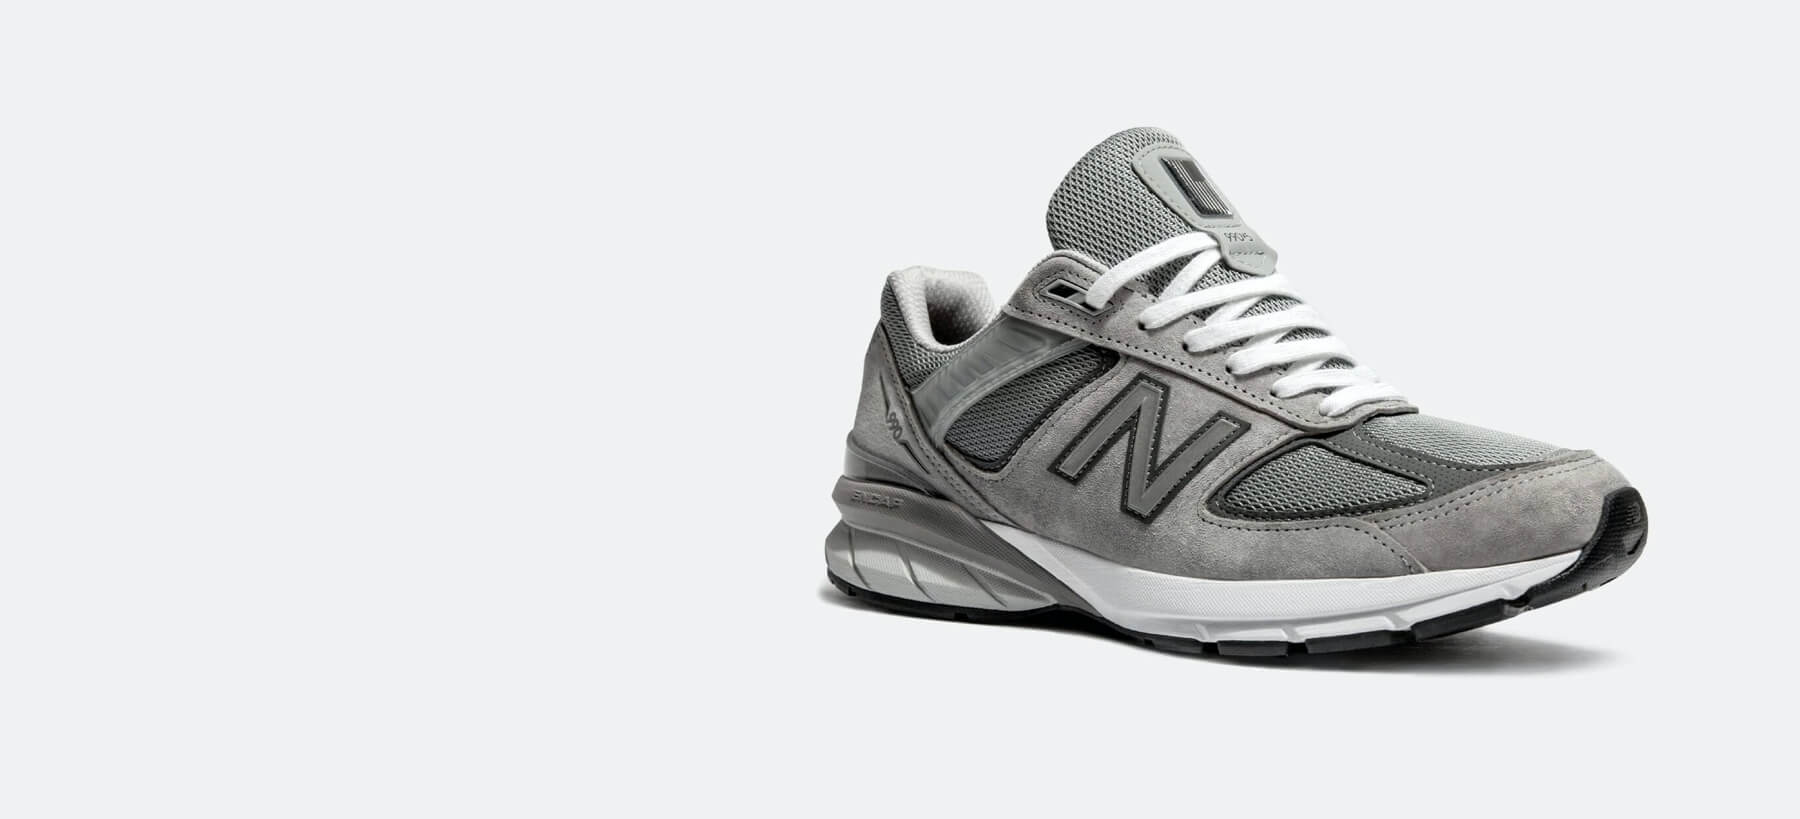 Best New Balance sneakers for fall